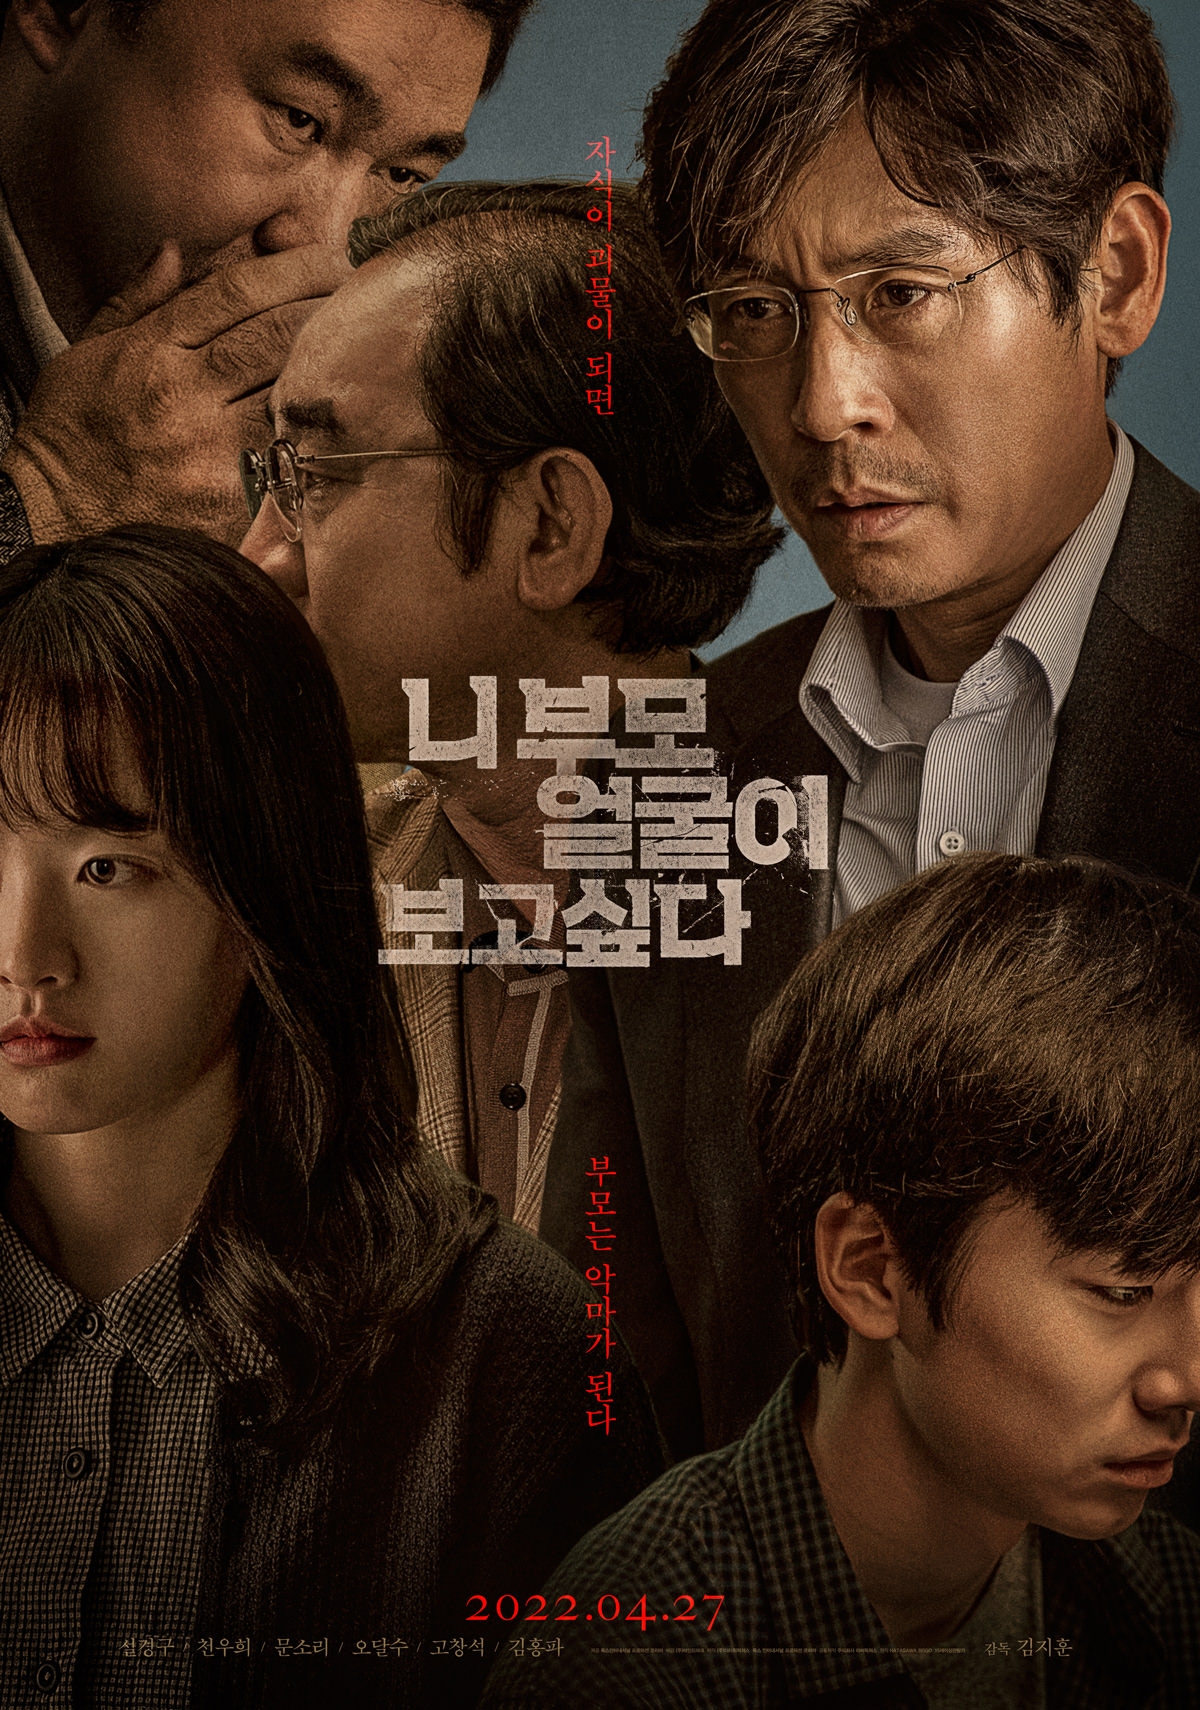 Reaction of the title of the new Korean movie ahead of its release